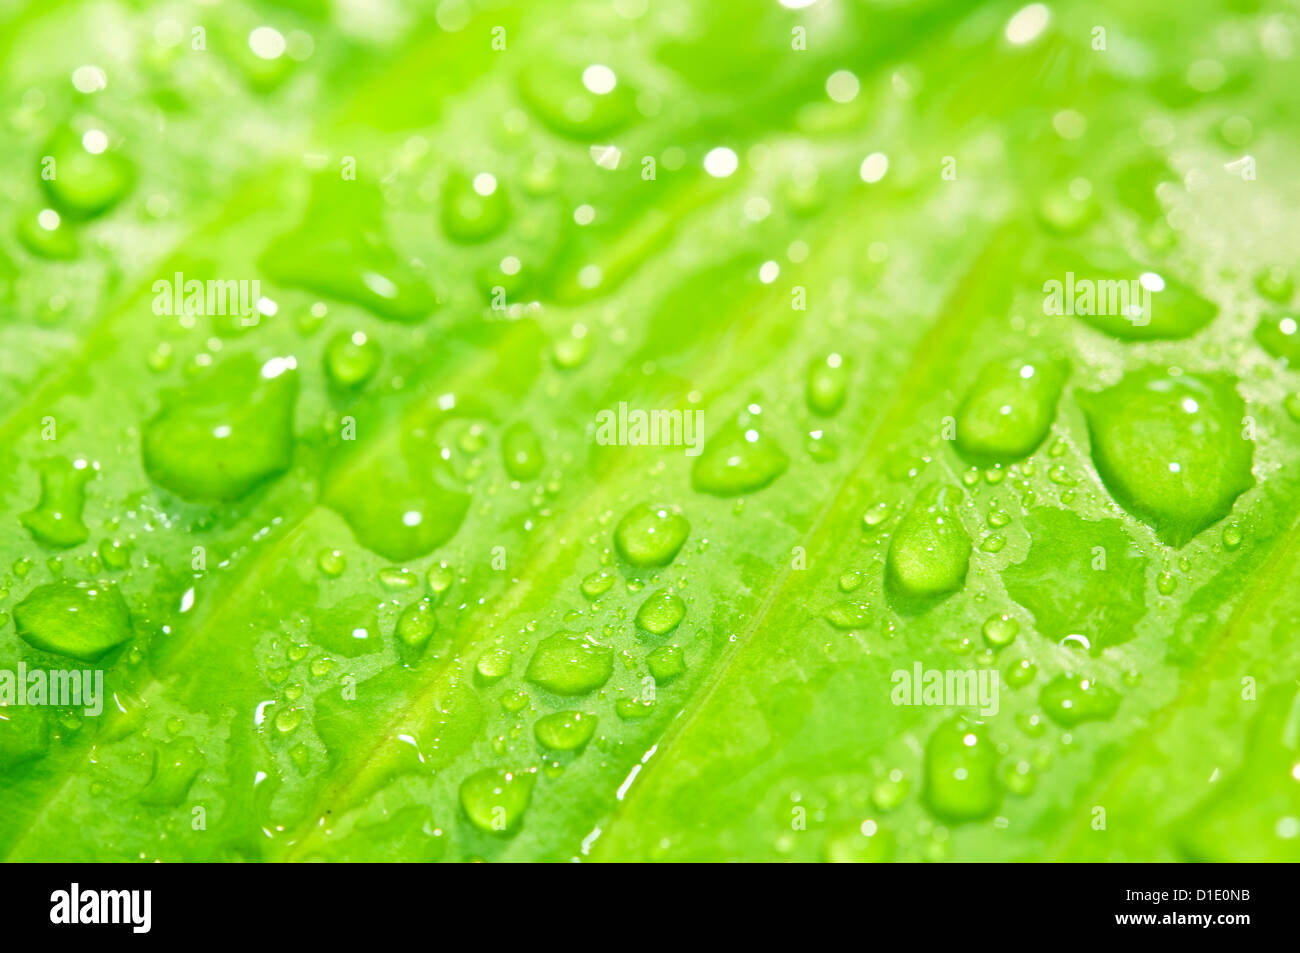 Green leaf with rain drops background. Selective focus on drops on front of right part of the leaf Stock Photo